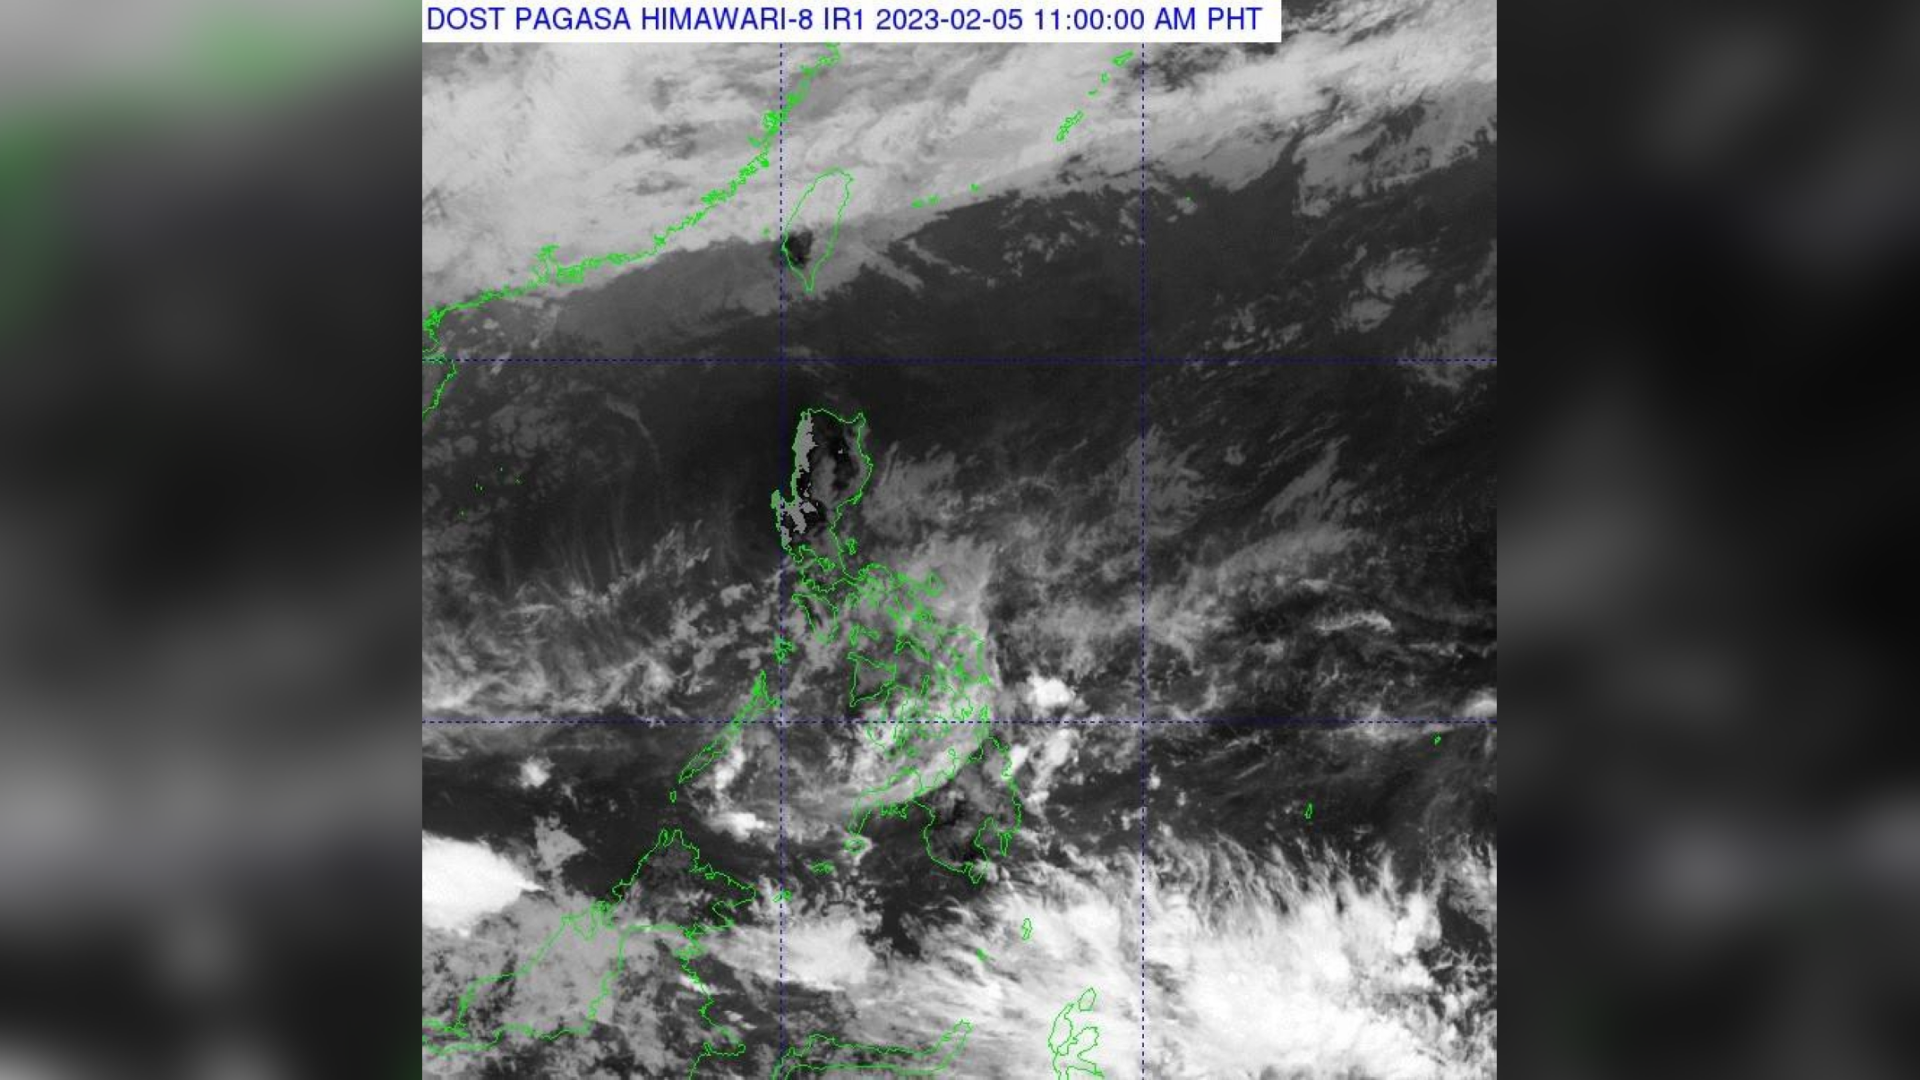 The northeast monsoon will prevail over Luzon, with isolated thunderstorms possible in VisMin over the next 24 hours.